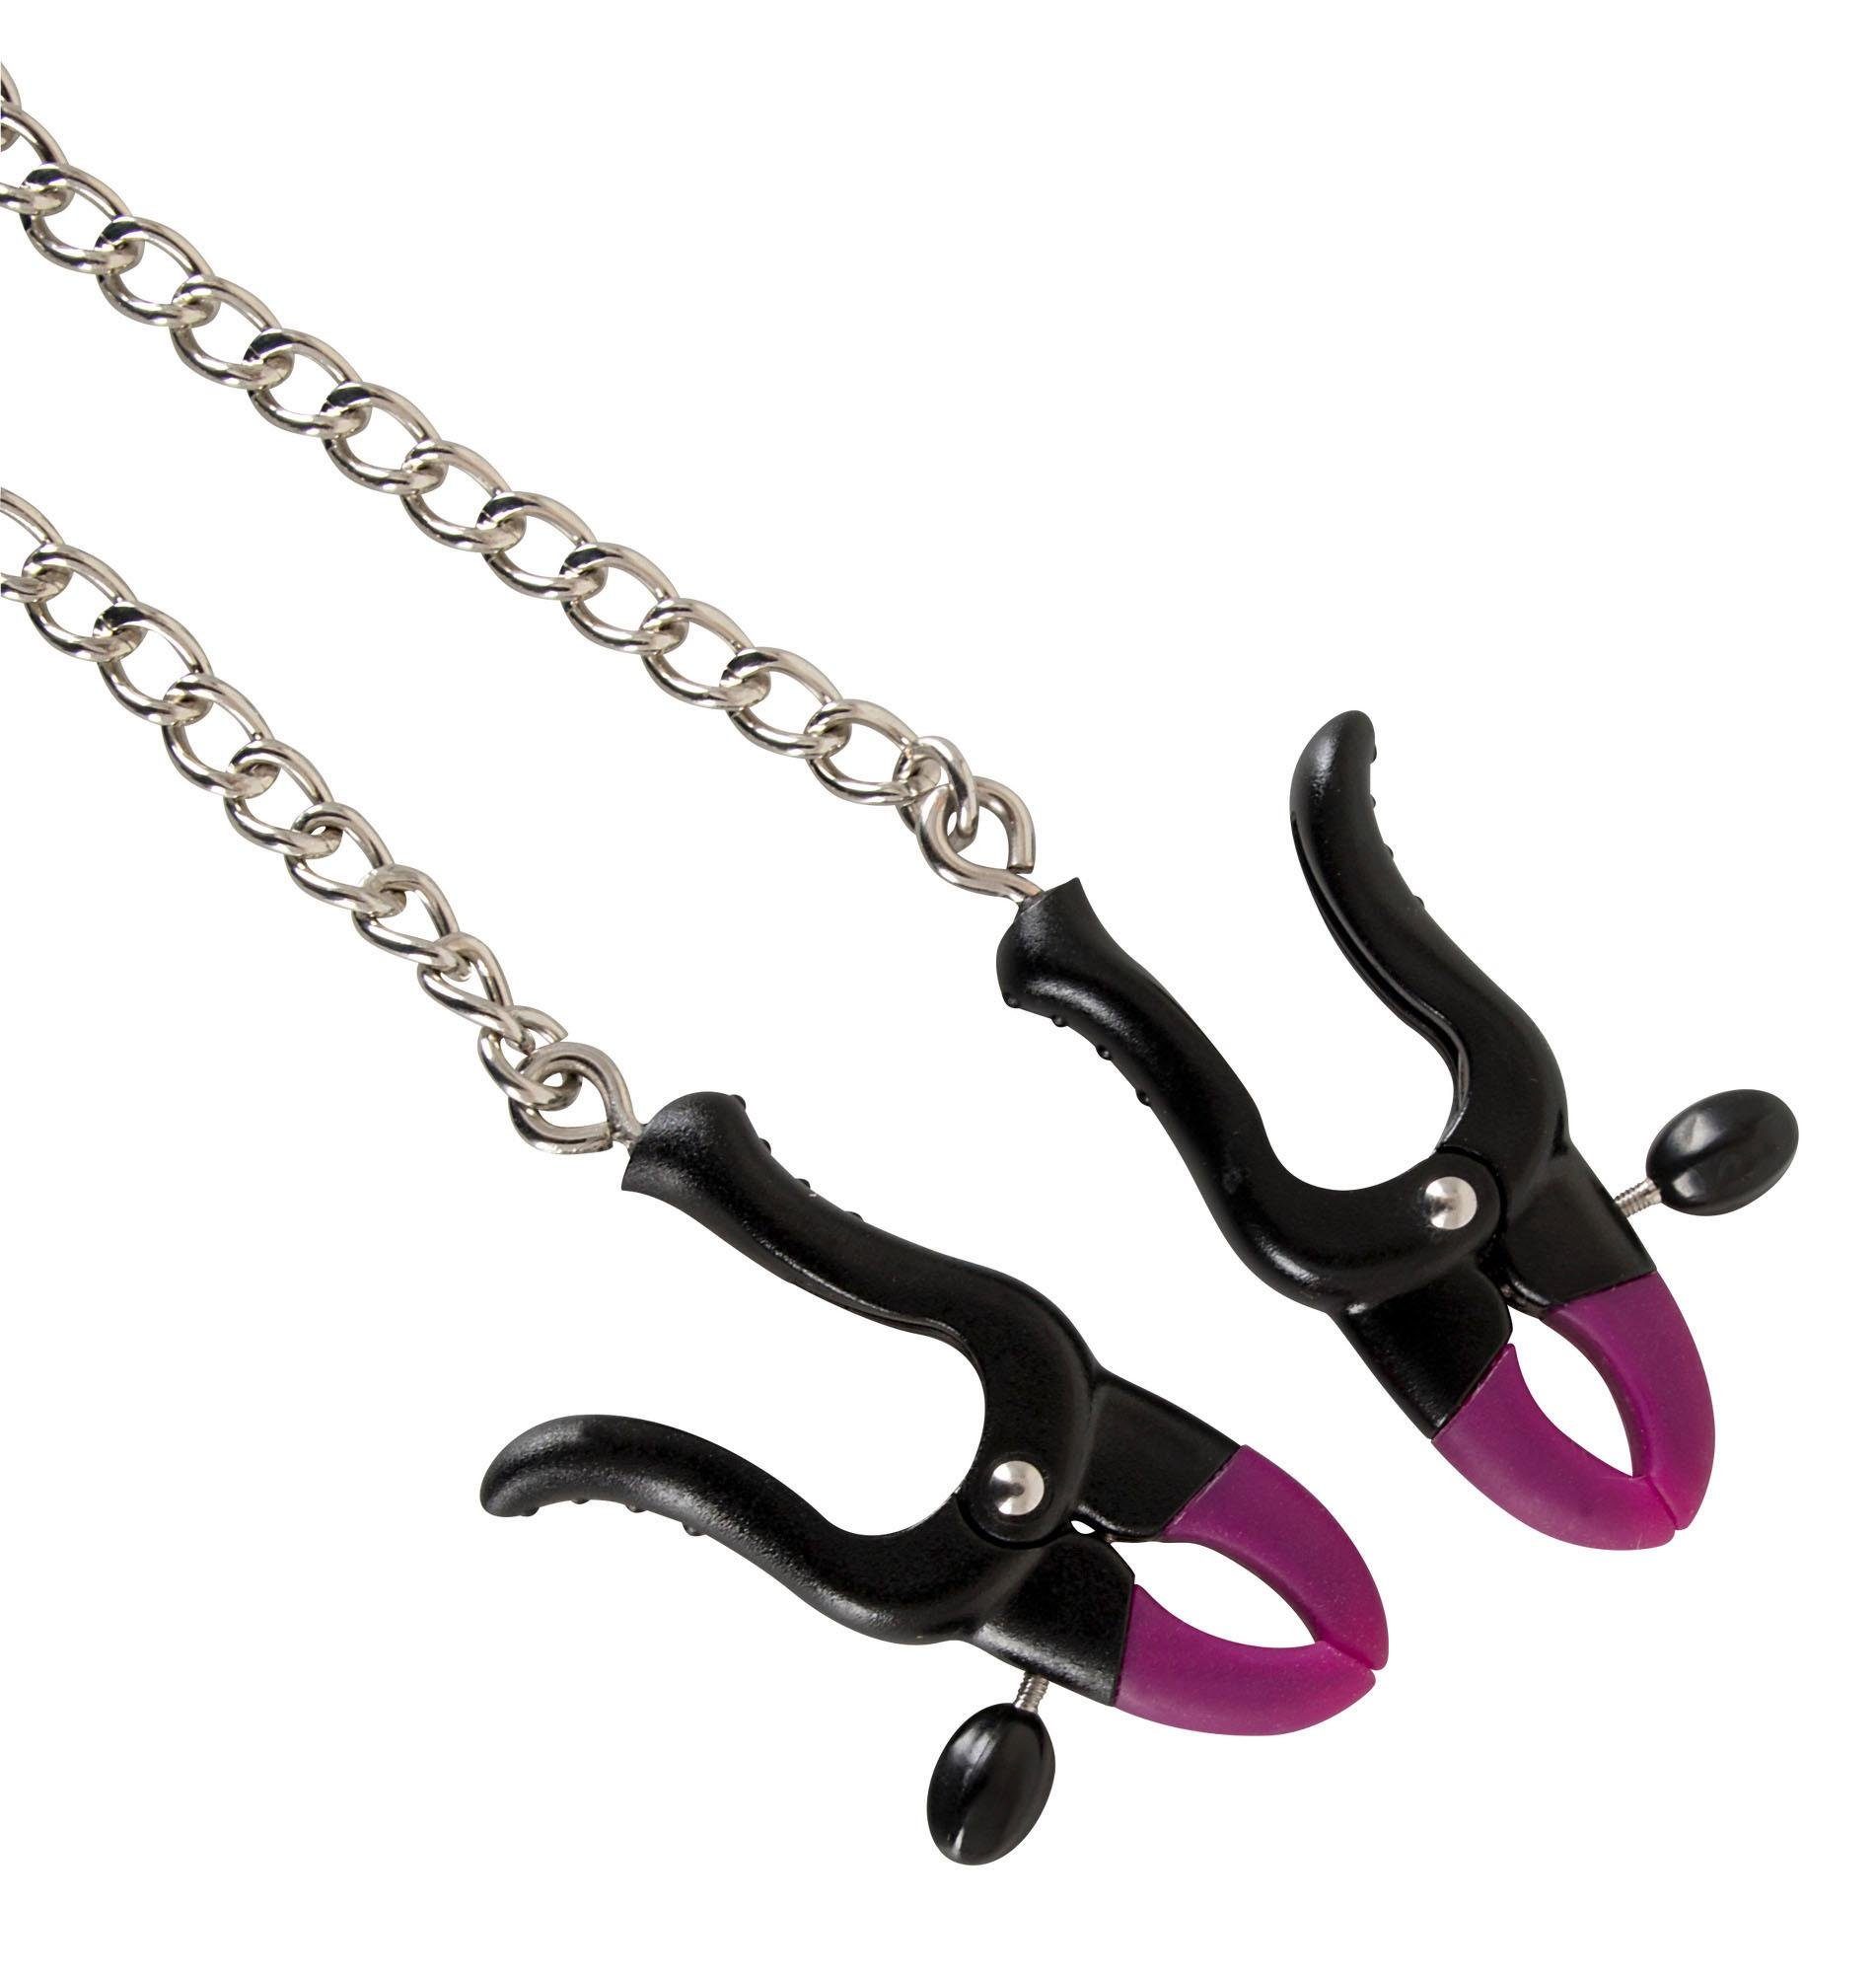 Kitty clamps, Nippelklemme silicone nipple mit Bad Kette